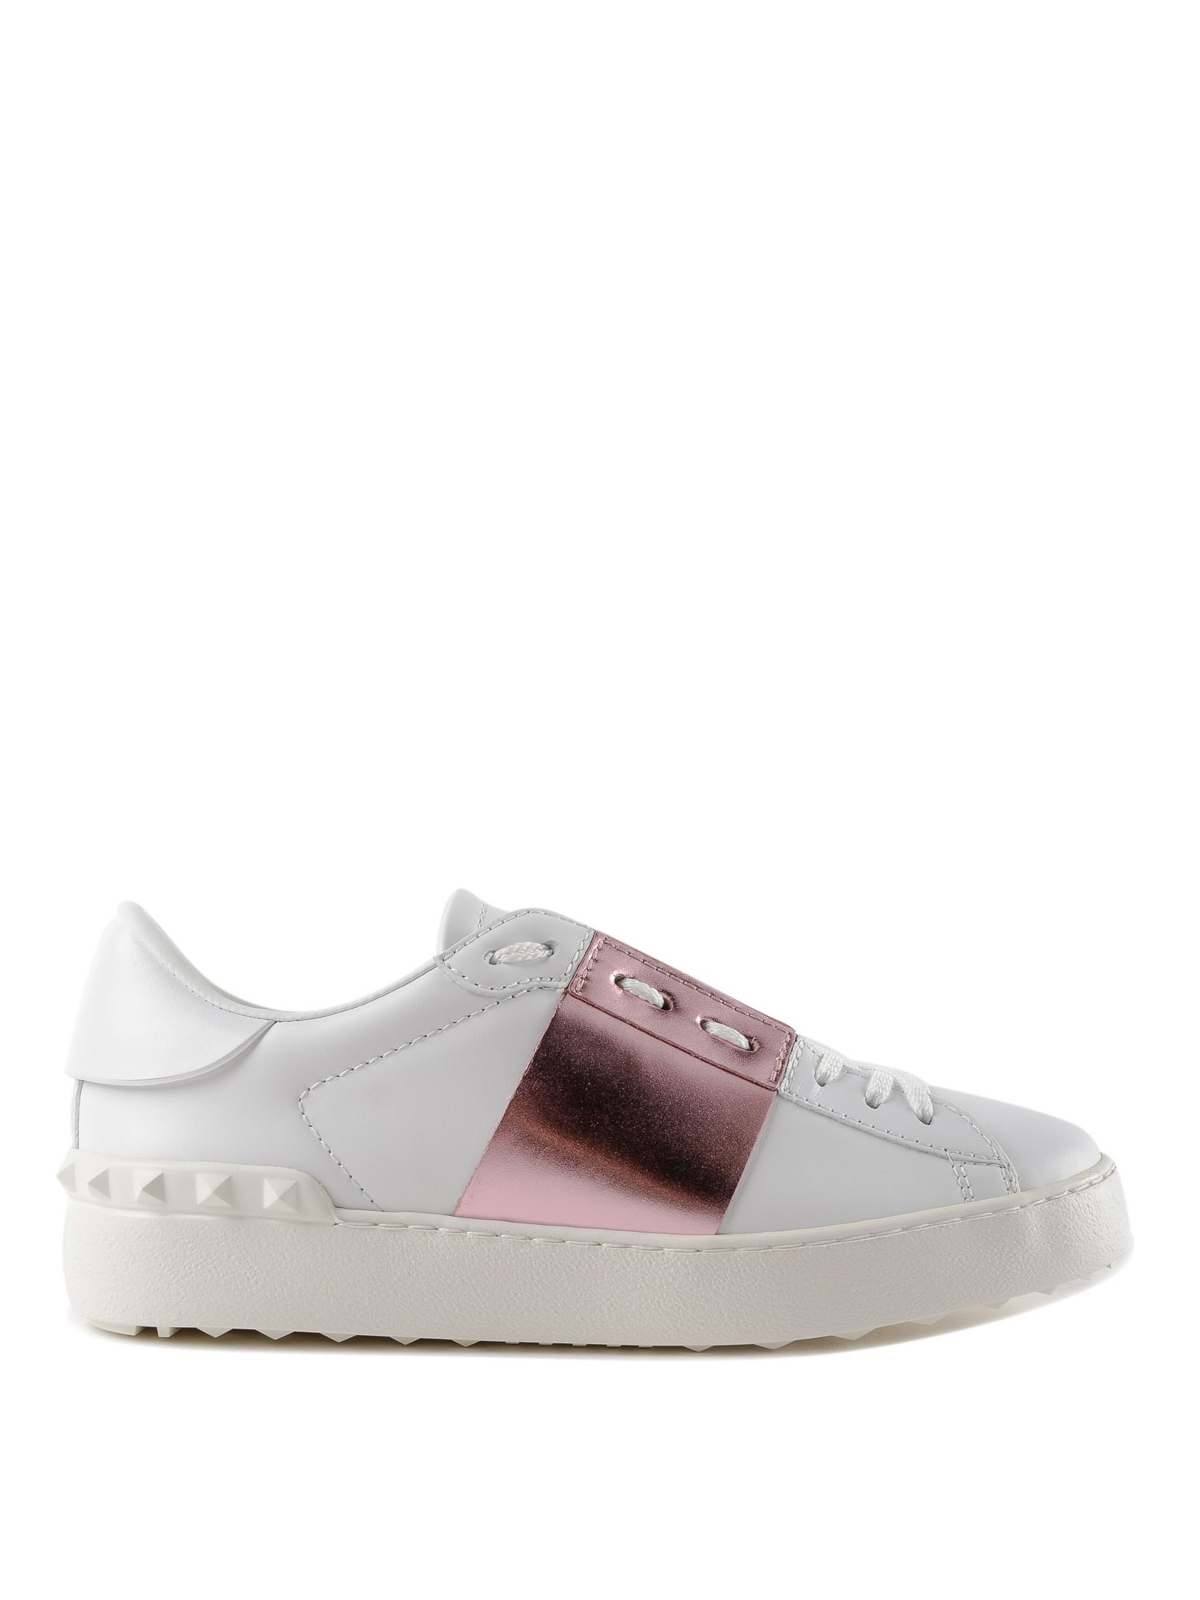 Open white sneakers with pink metallic 